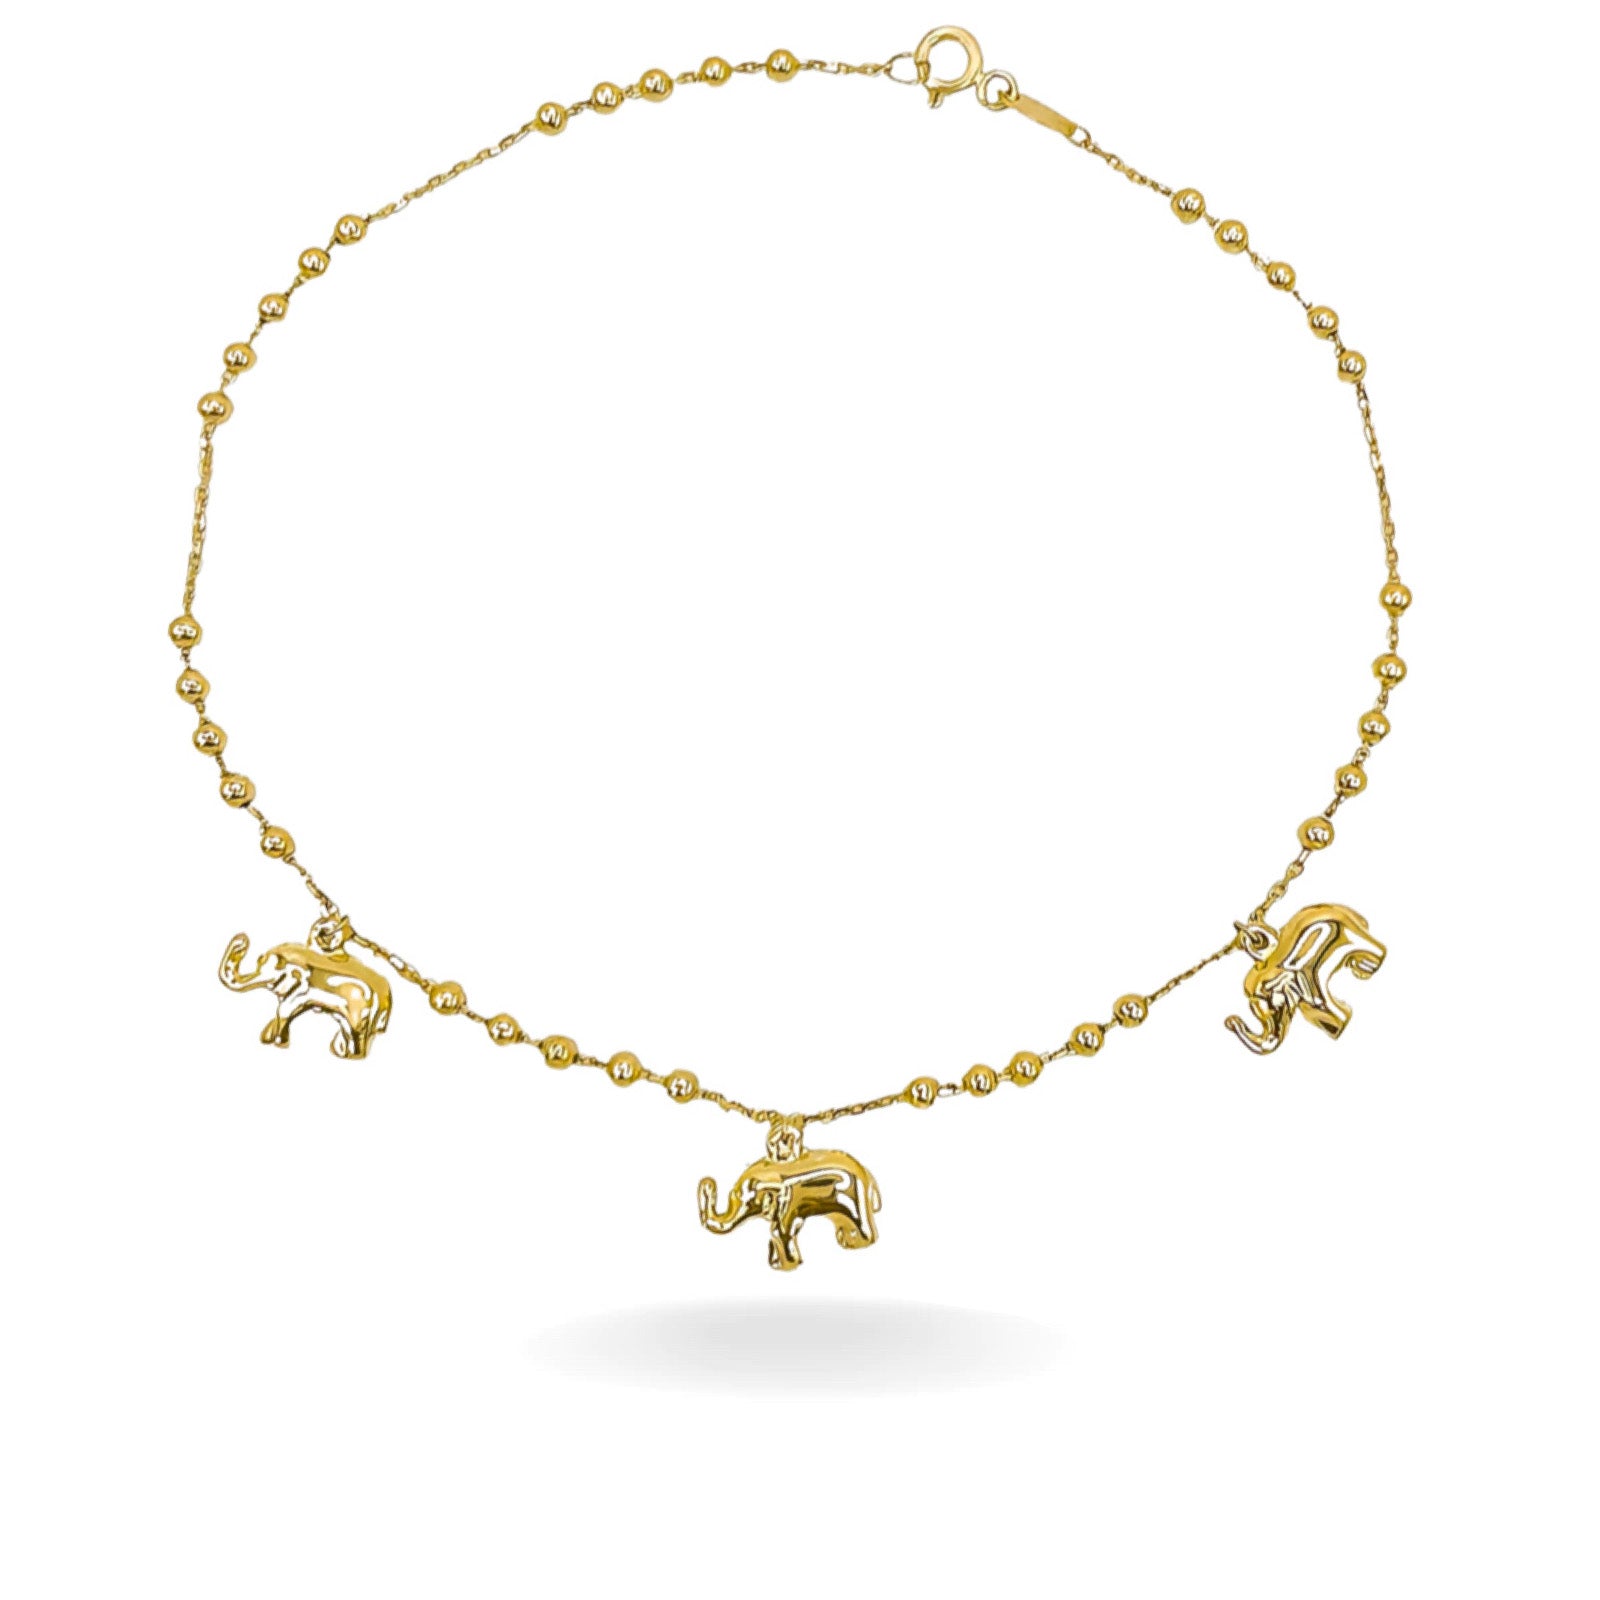 14K YELLOW GOLD ELEPHANT CHARMS ANKLET